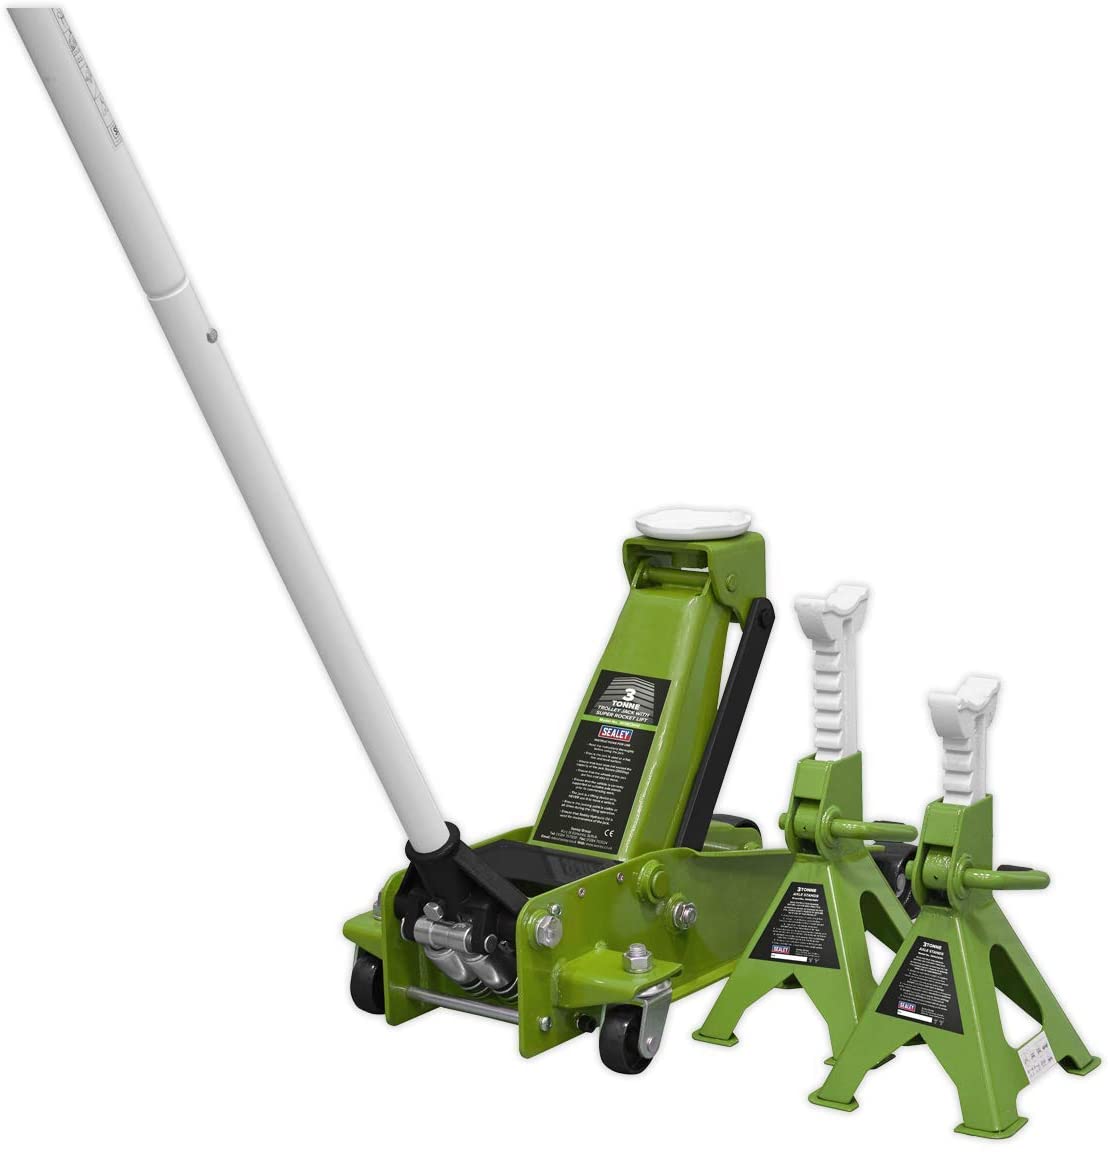 SEALEY - 3015CXHV Trolley Jack 3tonne with Super Rocket Lift & Axle Stands (Pair) 3tonne Capacity per Stand-Hi-Vis